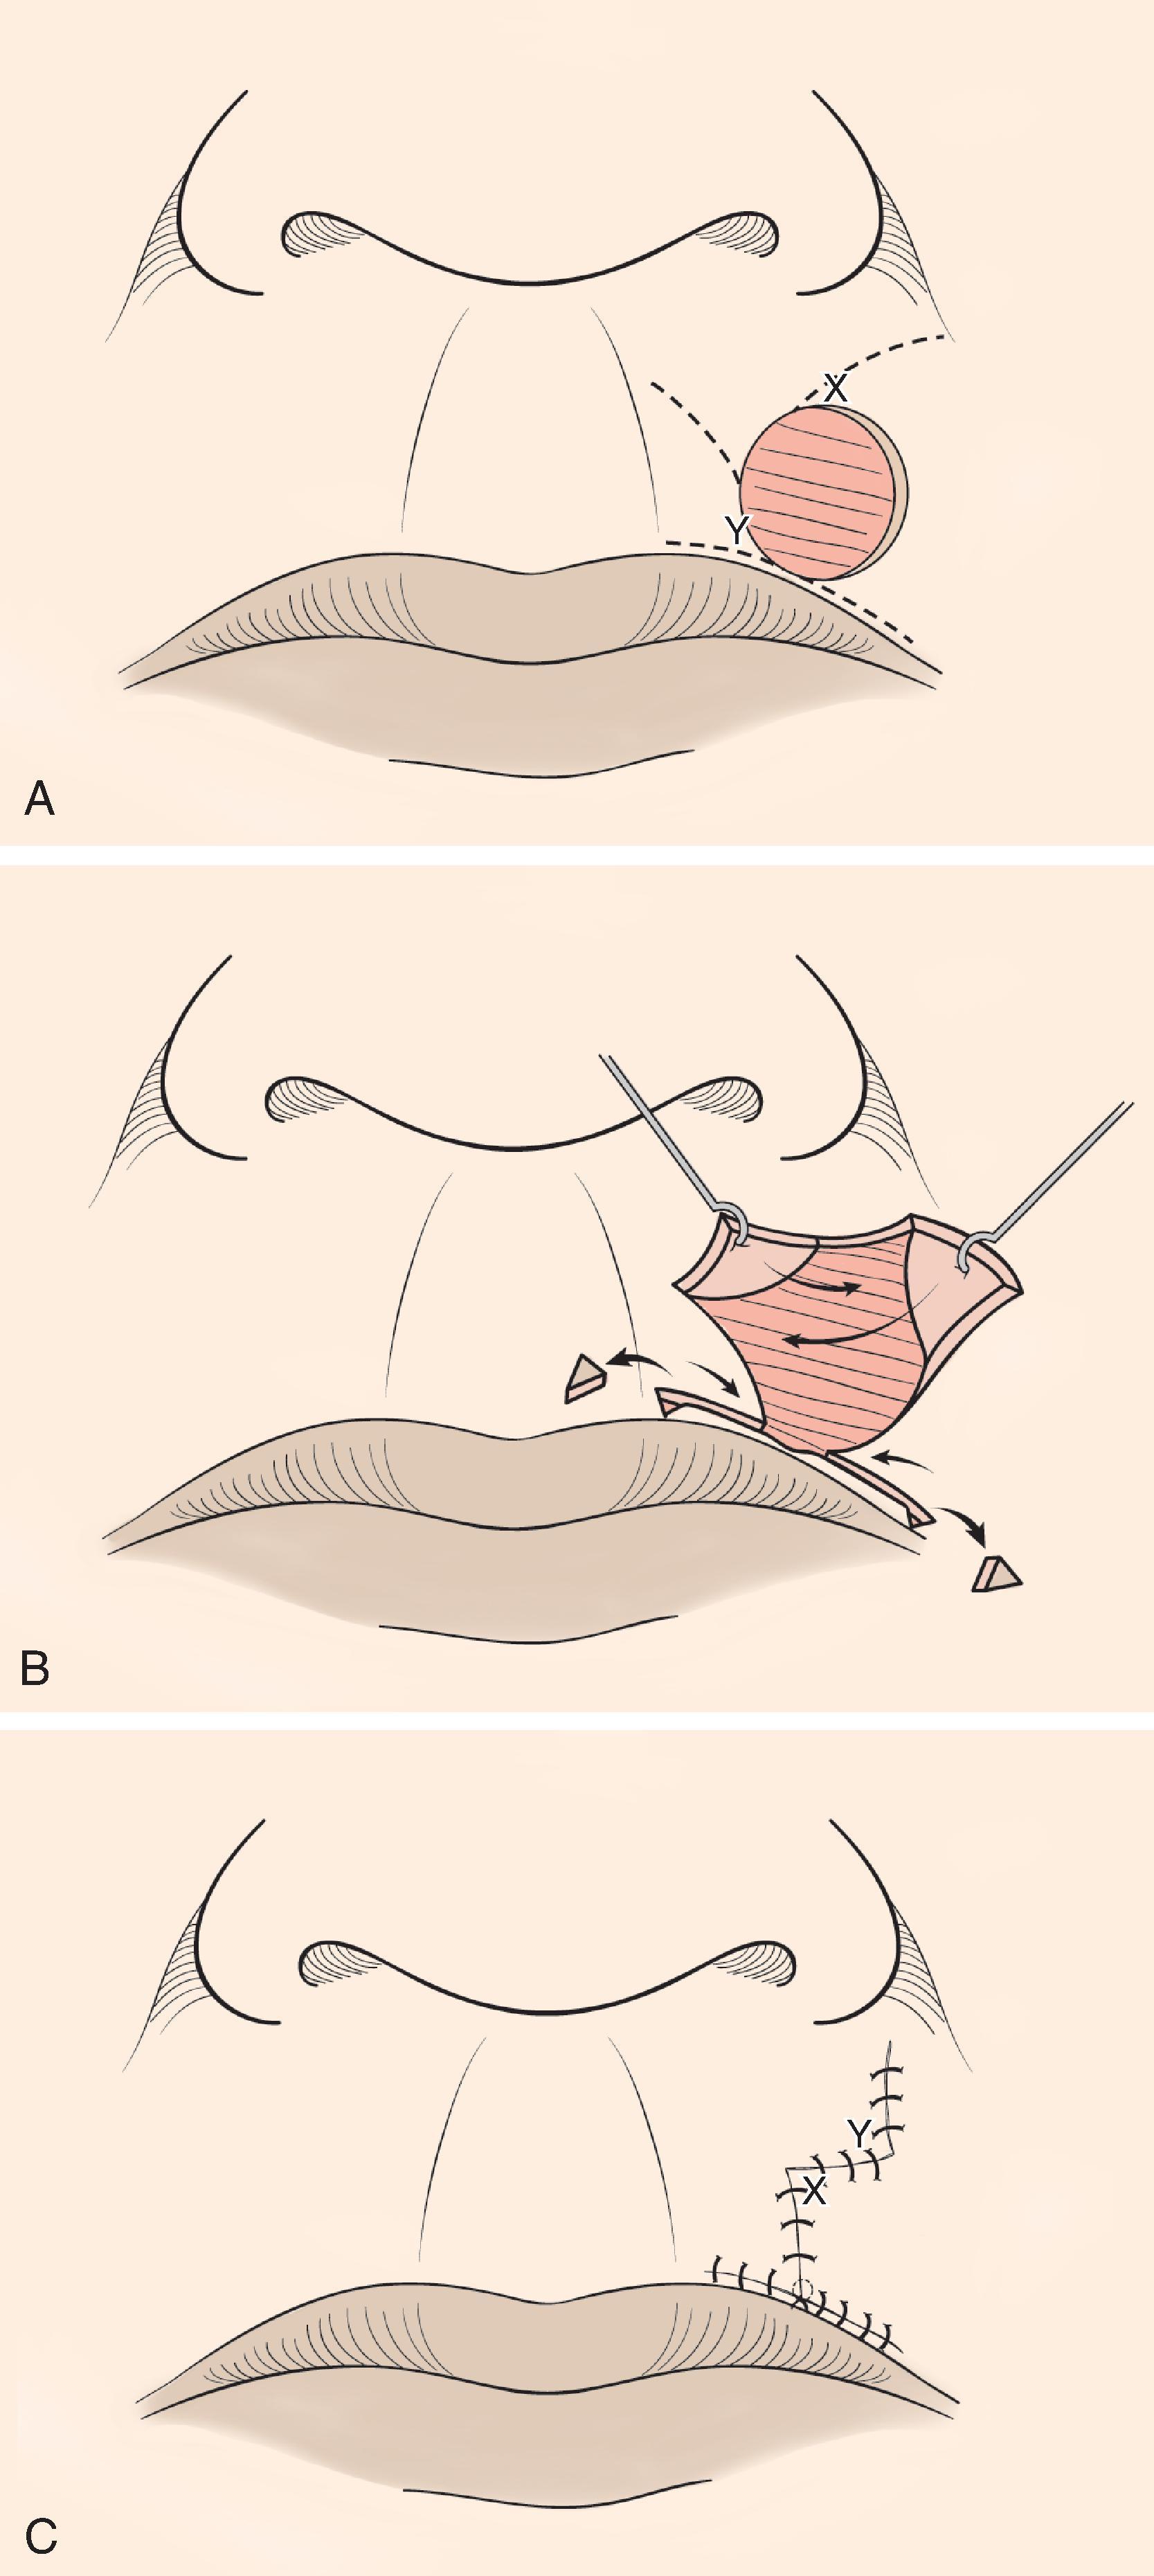 FIG. 9.8, A , Modified O-to-T (T-plasty) repair of circular cutaneous defect of upper lip. Inferior broken lines indicate incisions to create advancement flaps as part of classical T-plasty repair. Superior broken lines indicate incisions to create transposition flaps for modified Z-plasty, which eliminates need to excise standing cutaneous deformity superiorly. B , Flaps incised and dissected, small standing cutaneous deformities excised from vermilion border. C , Wound repaired. Vertical component of scar has Z configuration.